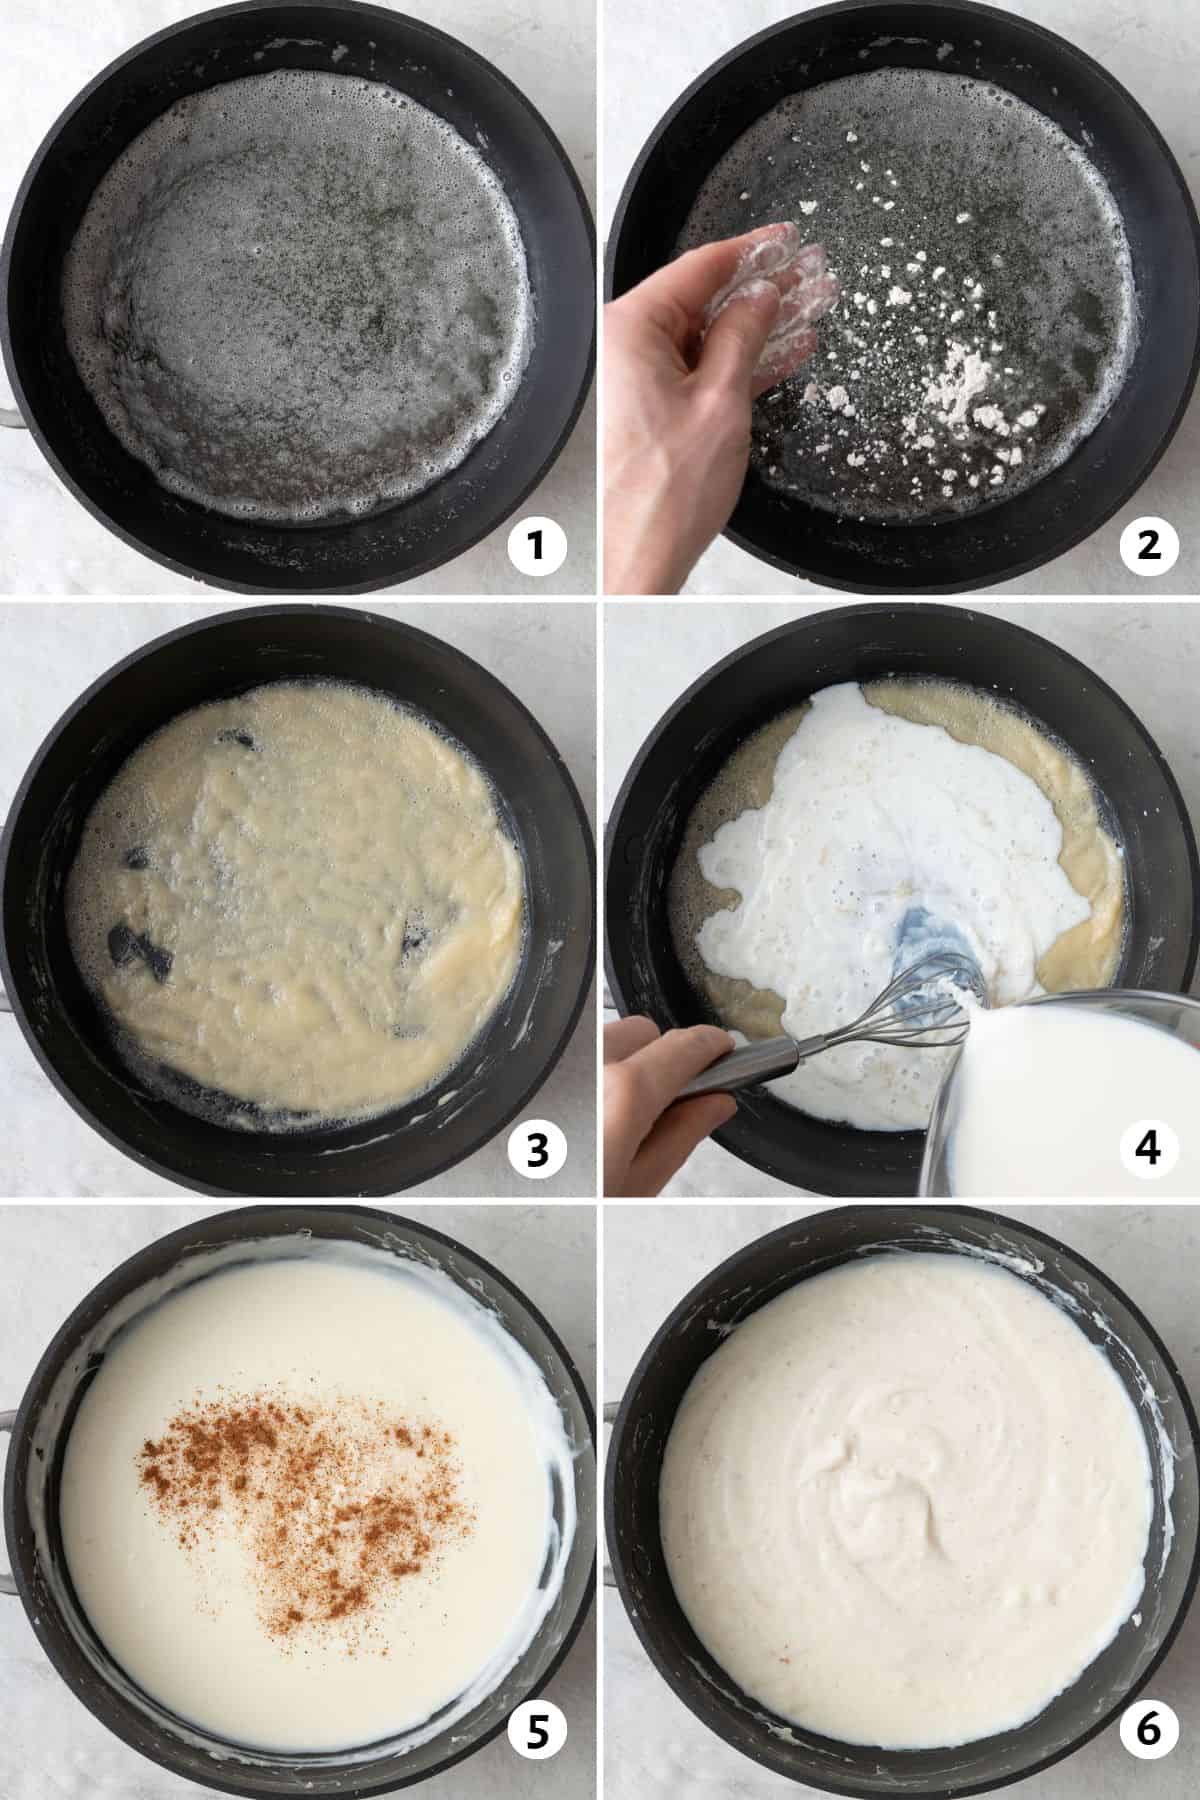 6 image collage making recipe in a pot: 1- melting butter in pot, 2- flour sprinkled into butter, 3- after roux is combined and slightly browned, 4- whisking in milk as it is being poured into roux, 5- after mixed with nutmeg sprinkled on top, 6- after fully combined.